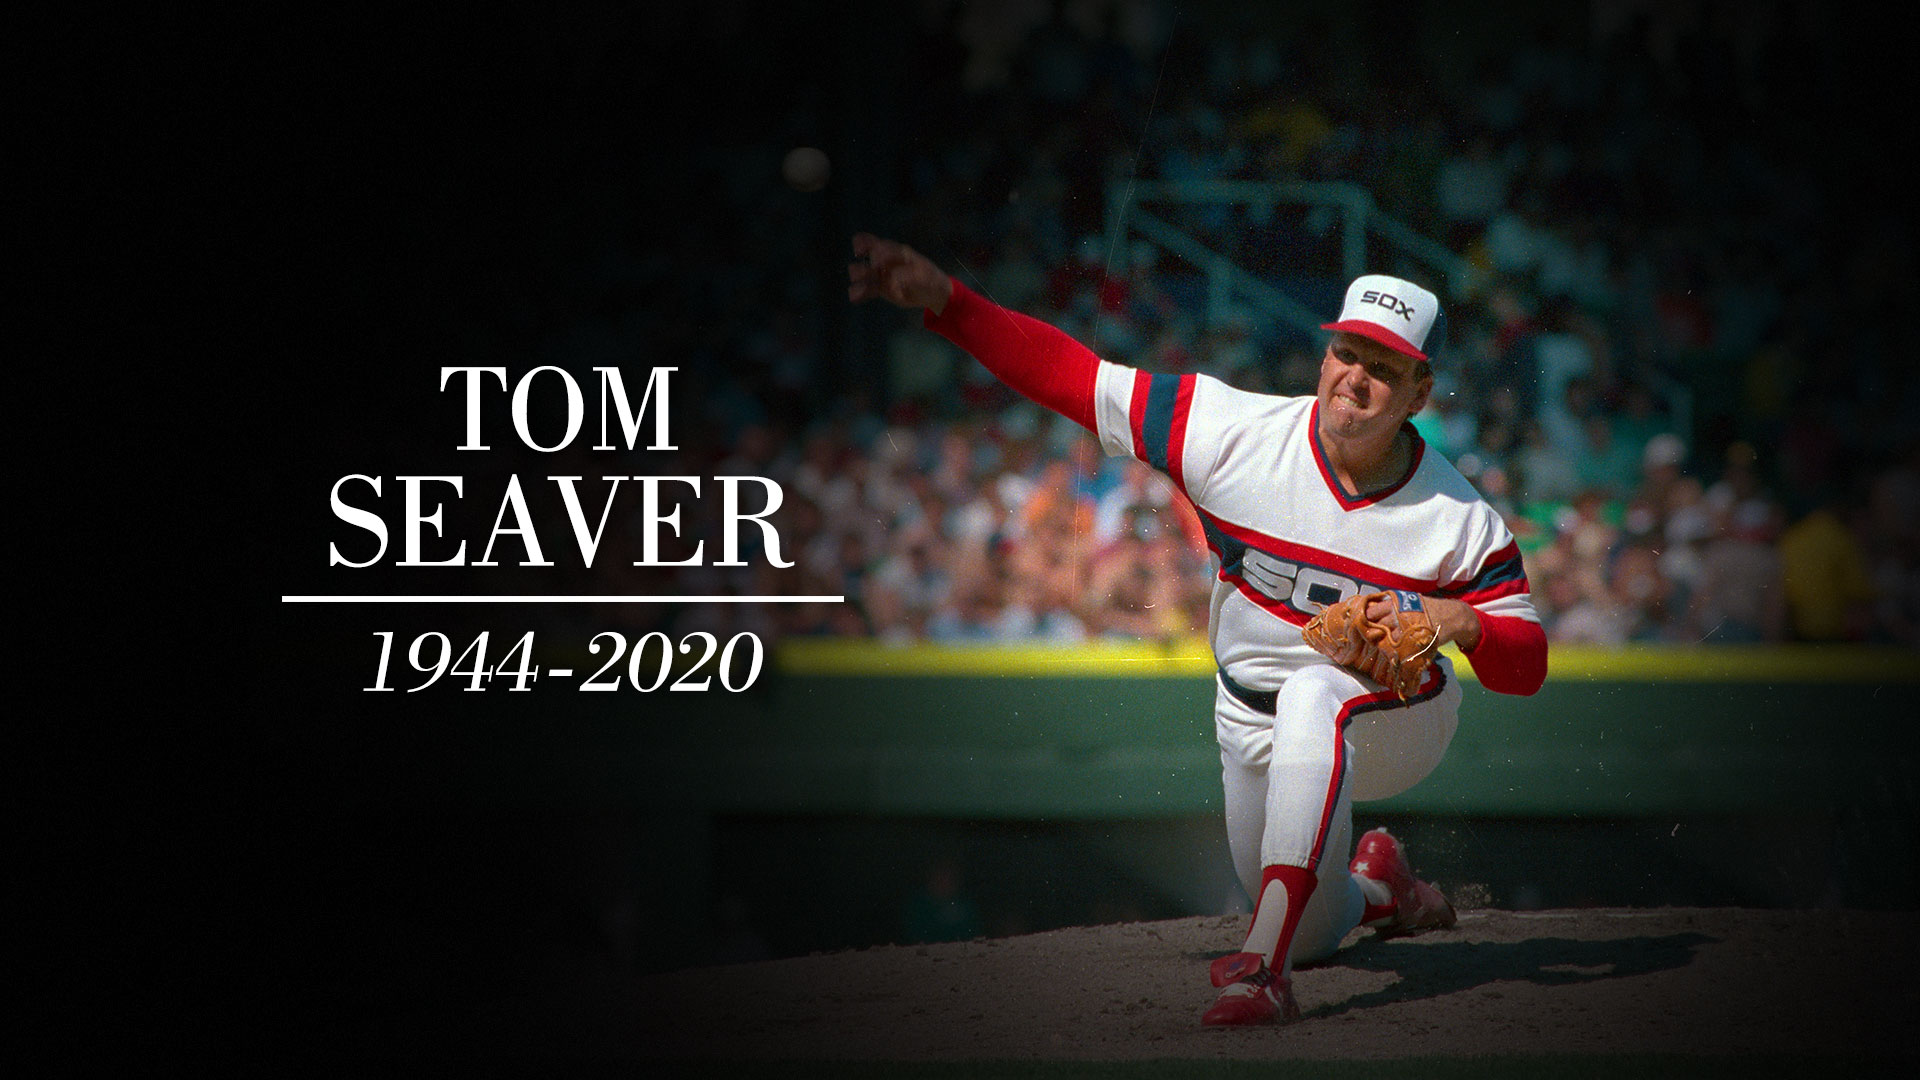 Hall of Fame pitcher Tom Seaver, who won 300th game with White